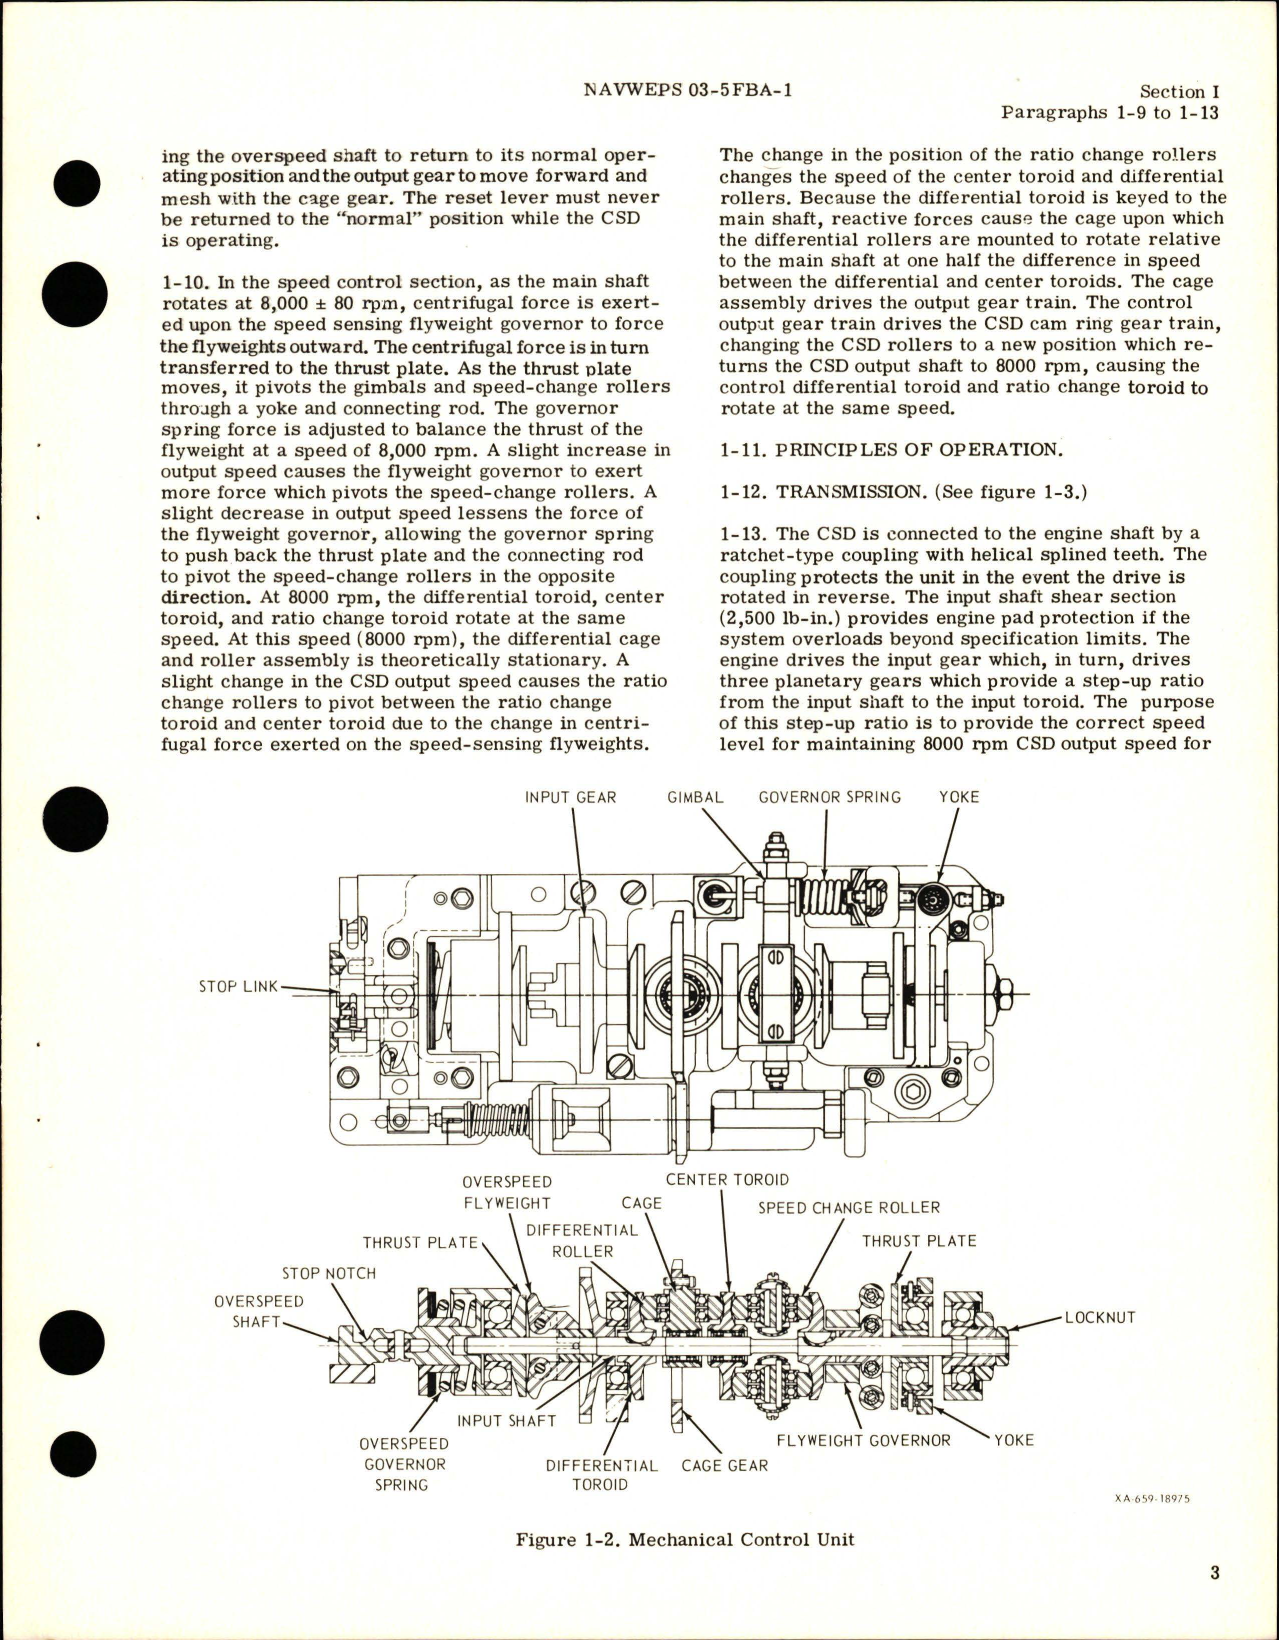 Sample page 7 from AirCorps Library document: Operation and Maintenance Instructions for Constant Speed Drive - Model LD6-3, LD6-9, and LD6-10